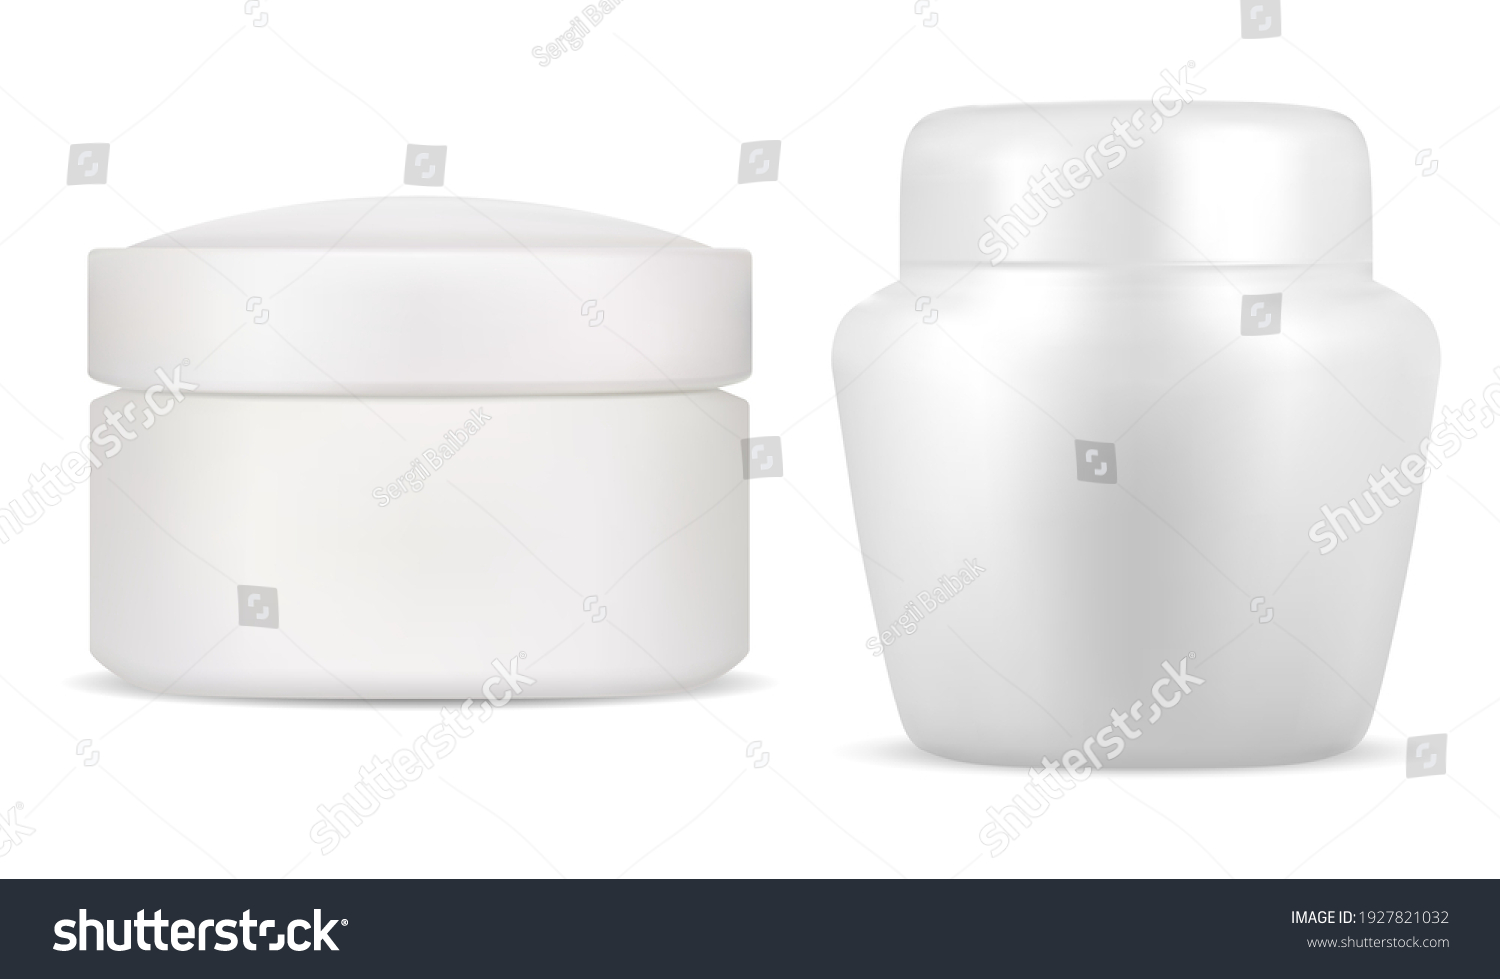 SVG of Cream jar cosmetic white package. Creme bottle mockup, round 3d vector blank. Realistic lotion packaging for corporate identity branding. Skin blush makeup can, beauty jar template svg